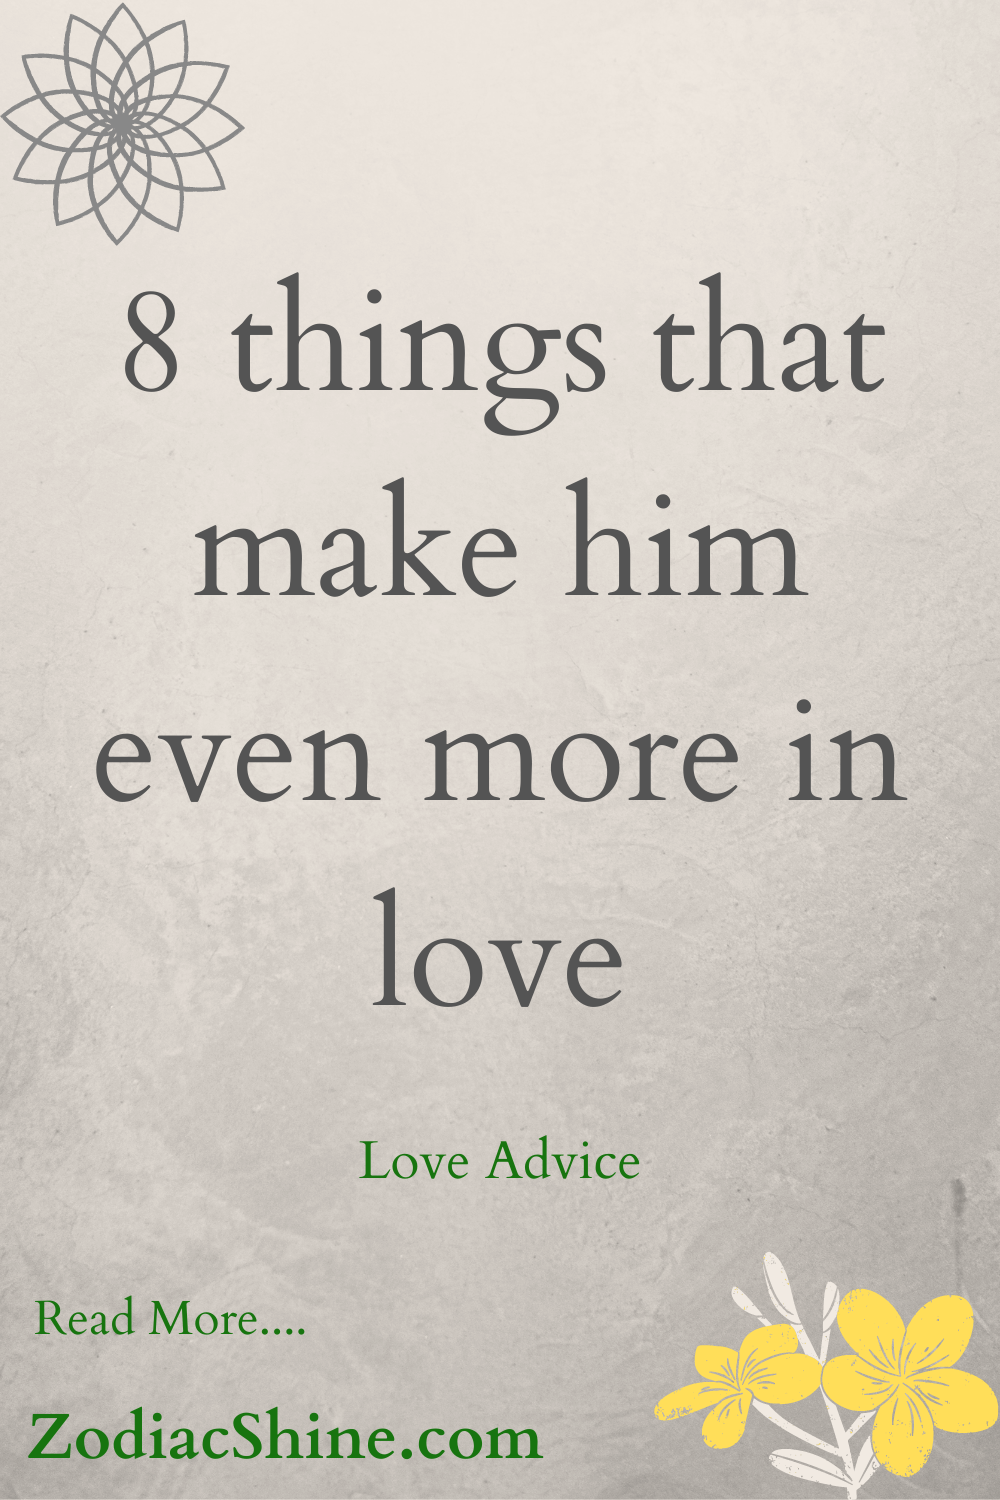  8 things that make him even more in love